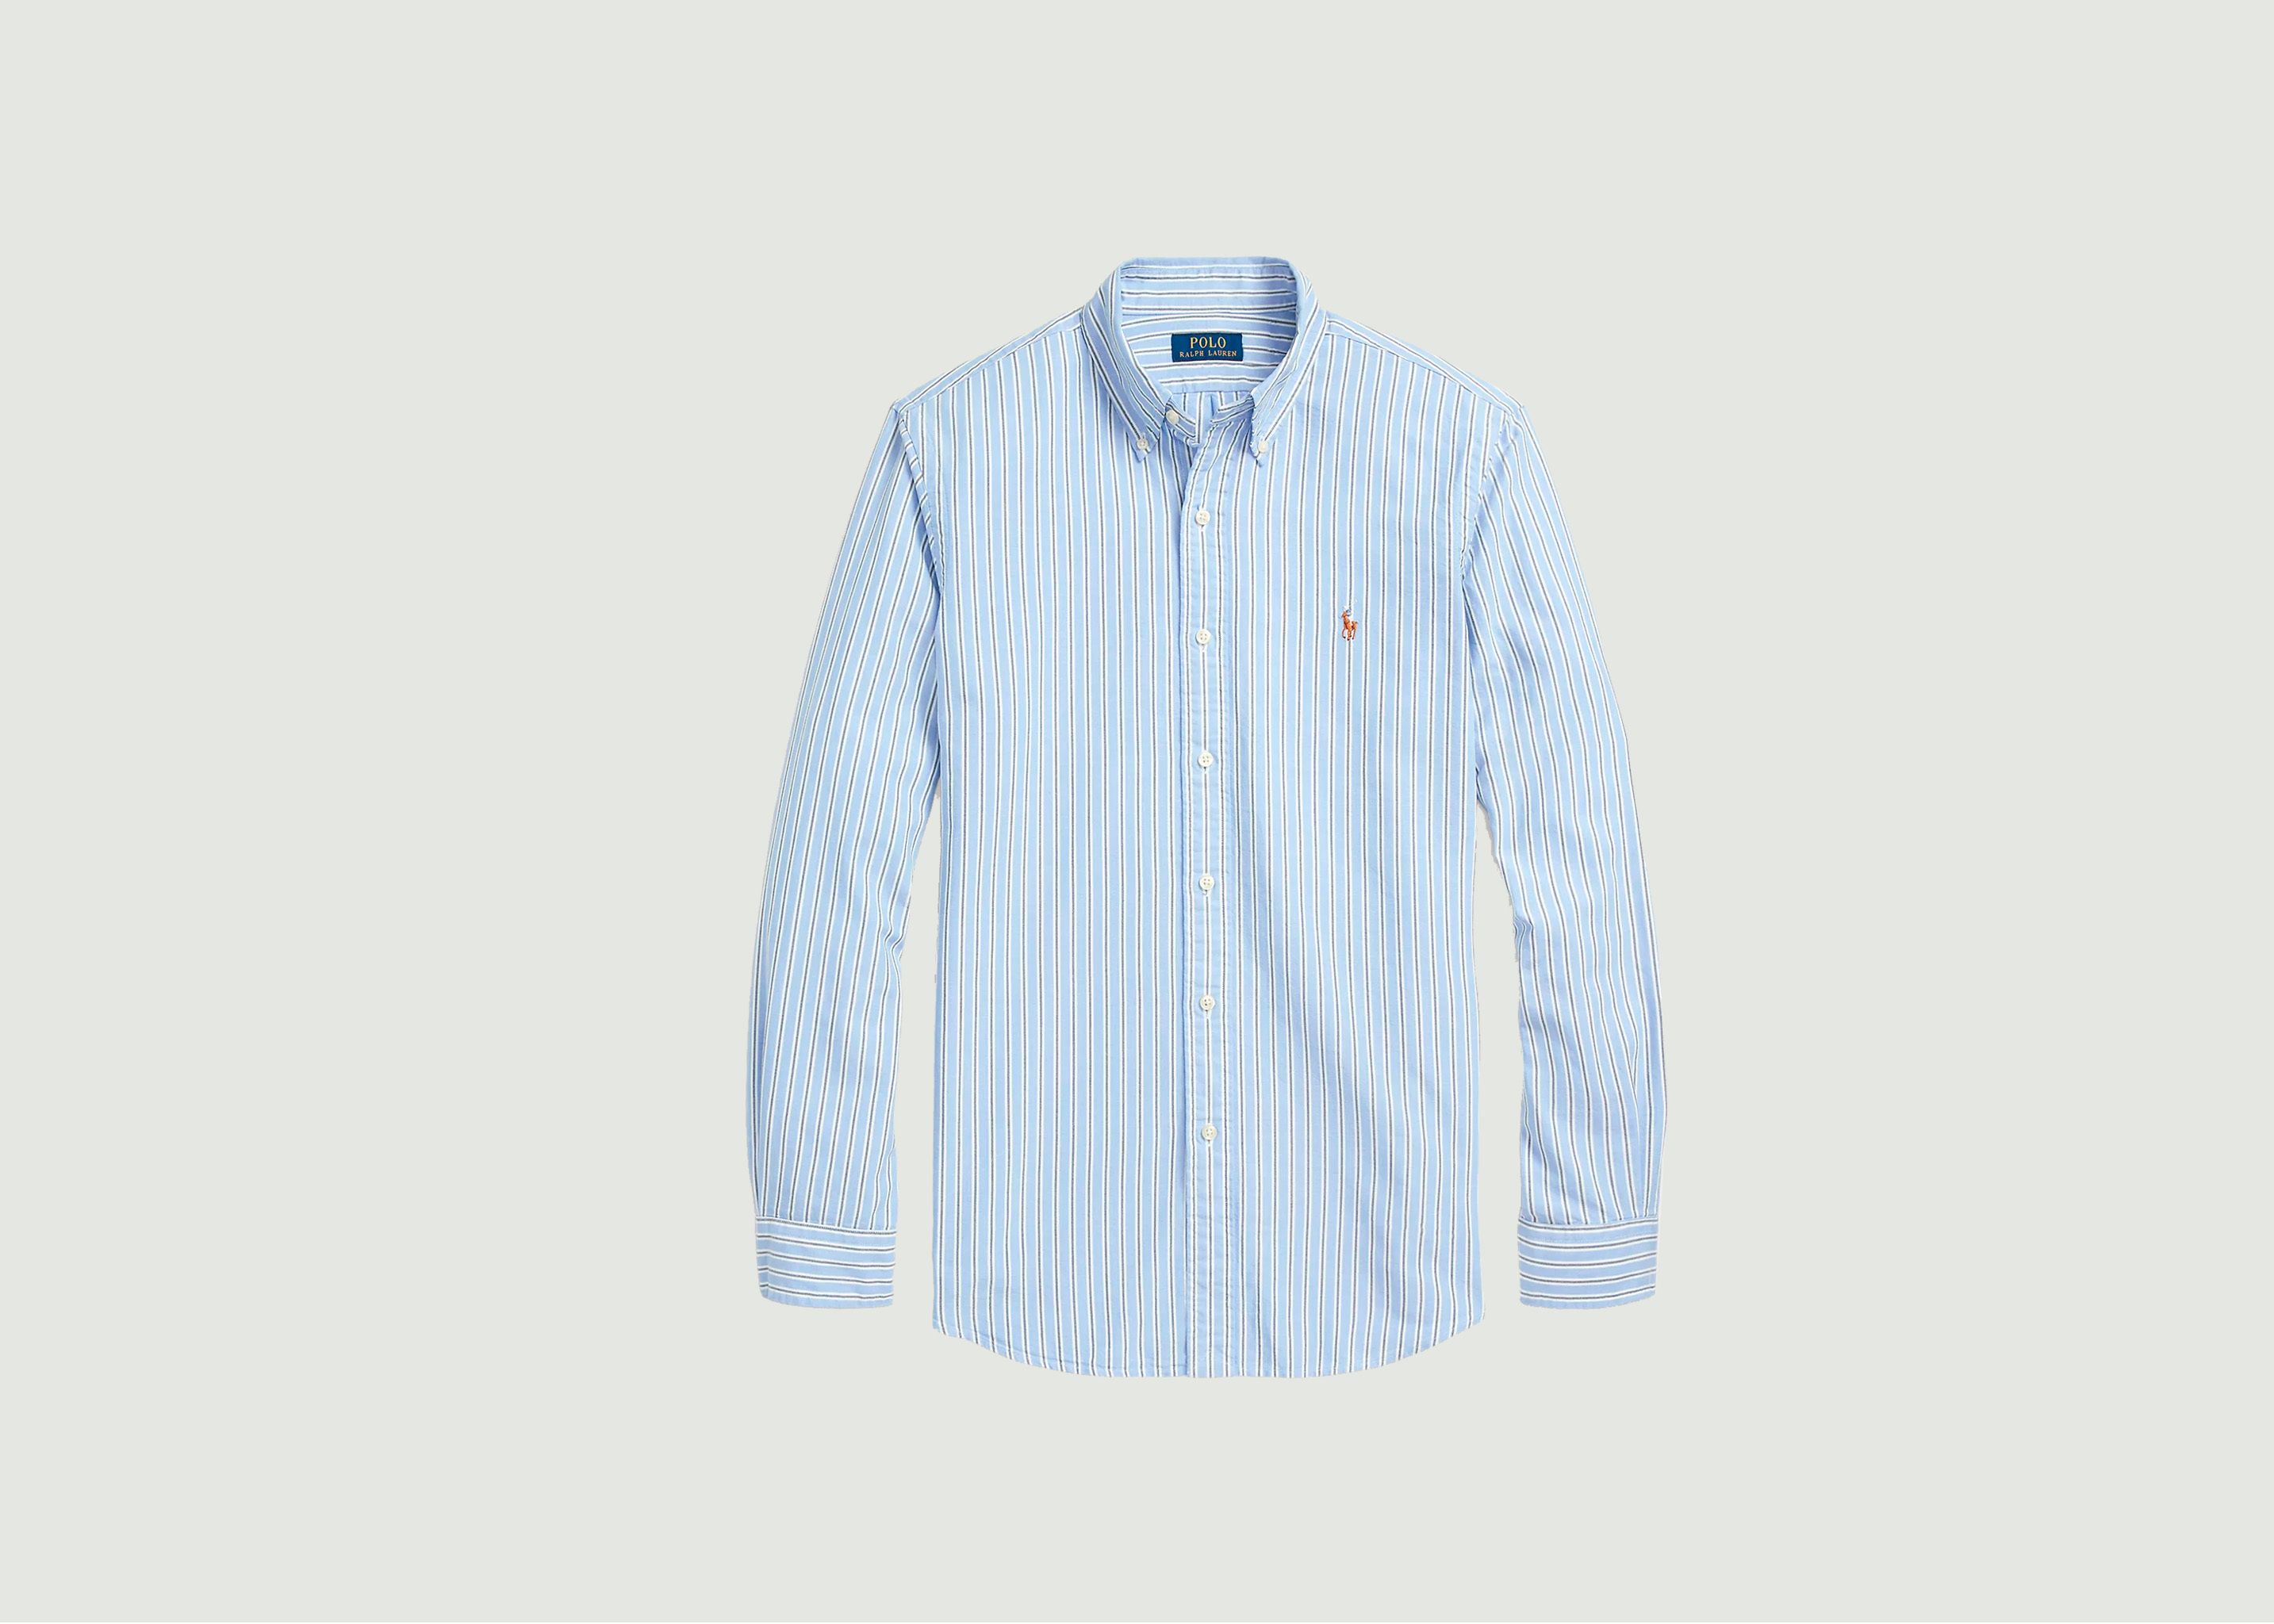 Oxford shirt with stripes - Polo Ralph Lauren